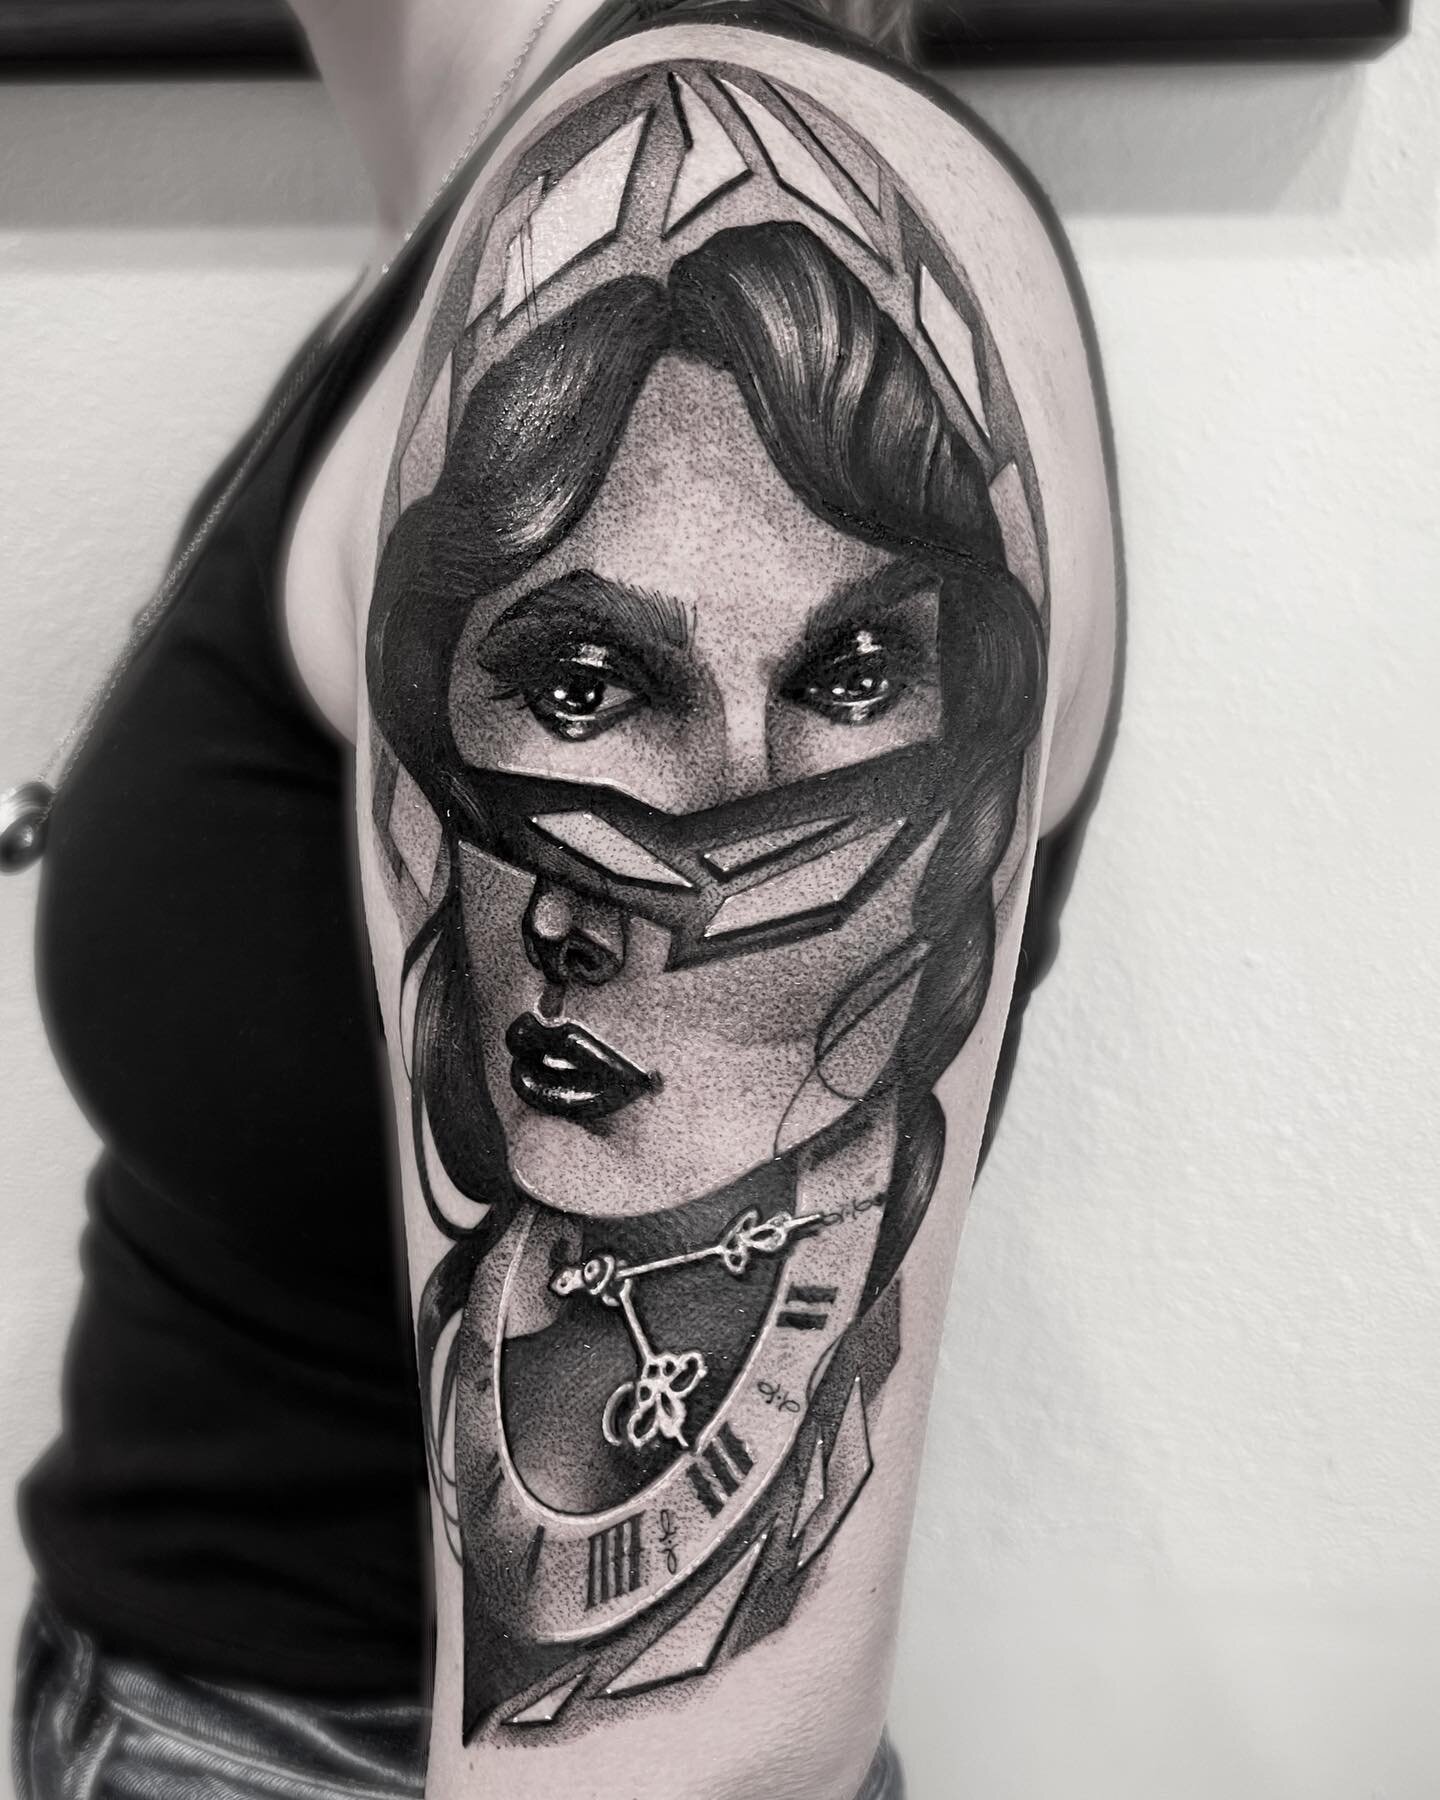 Fun lady face concept for Kenna!Thanks for the freedom 🖤 Completed in 2 sessions.
✖️ Done at @sharktooth_tattoo ✖️
.
.
.
.
@goodguysupply
@industryinks
@hivecaps 
.
.
.
.
.
.
.
.
.
.
.
.
.
#tattoo #tattoos #tattooartist #tattooed #blackworkers #blac